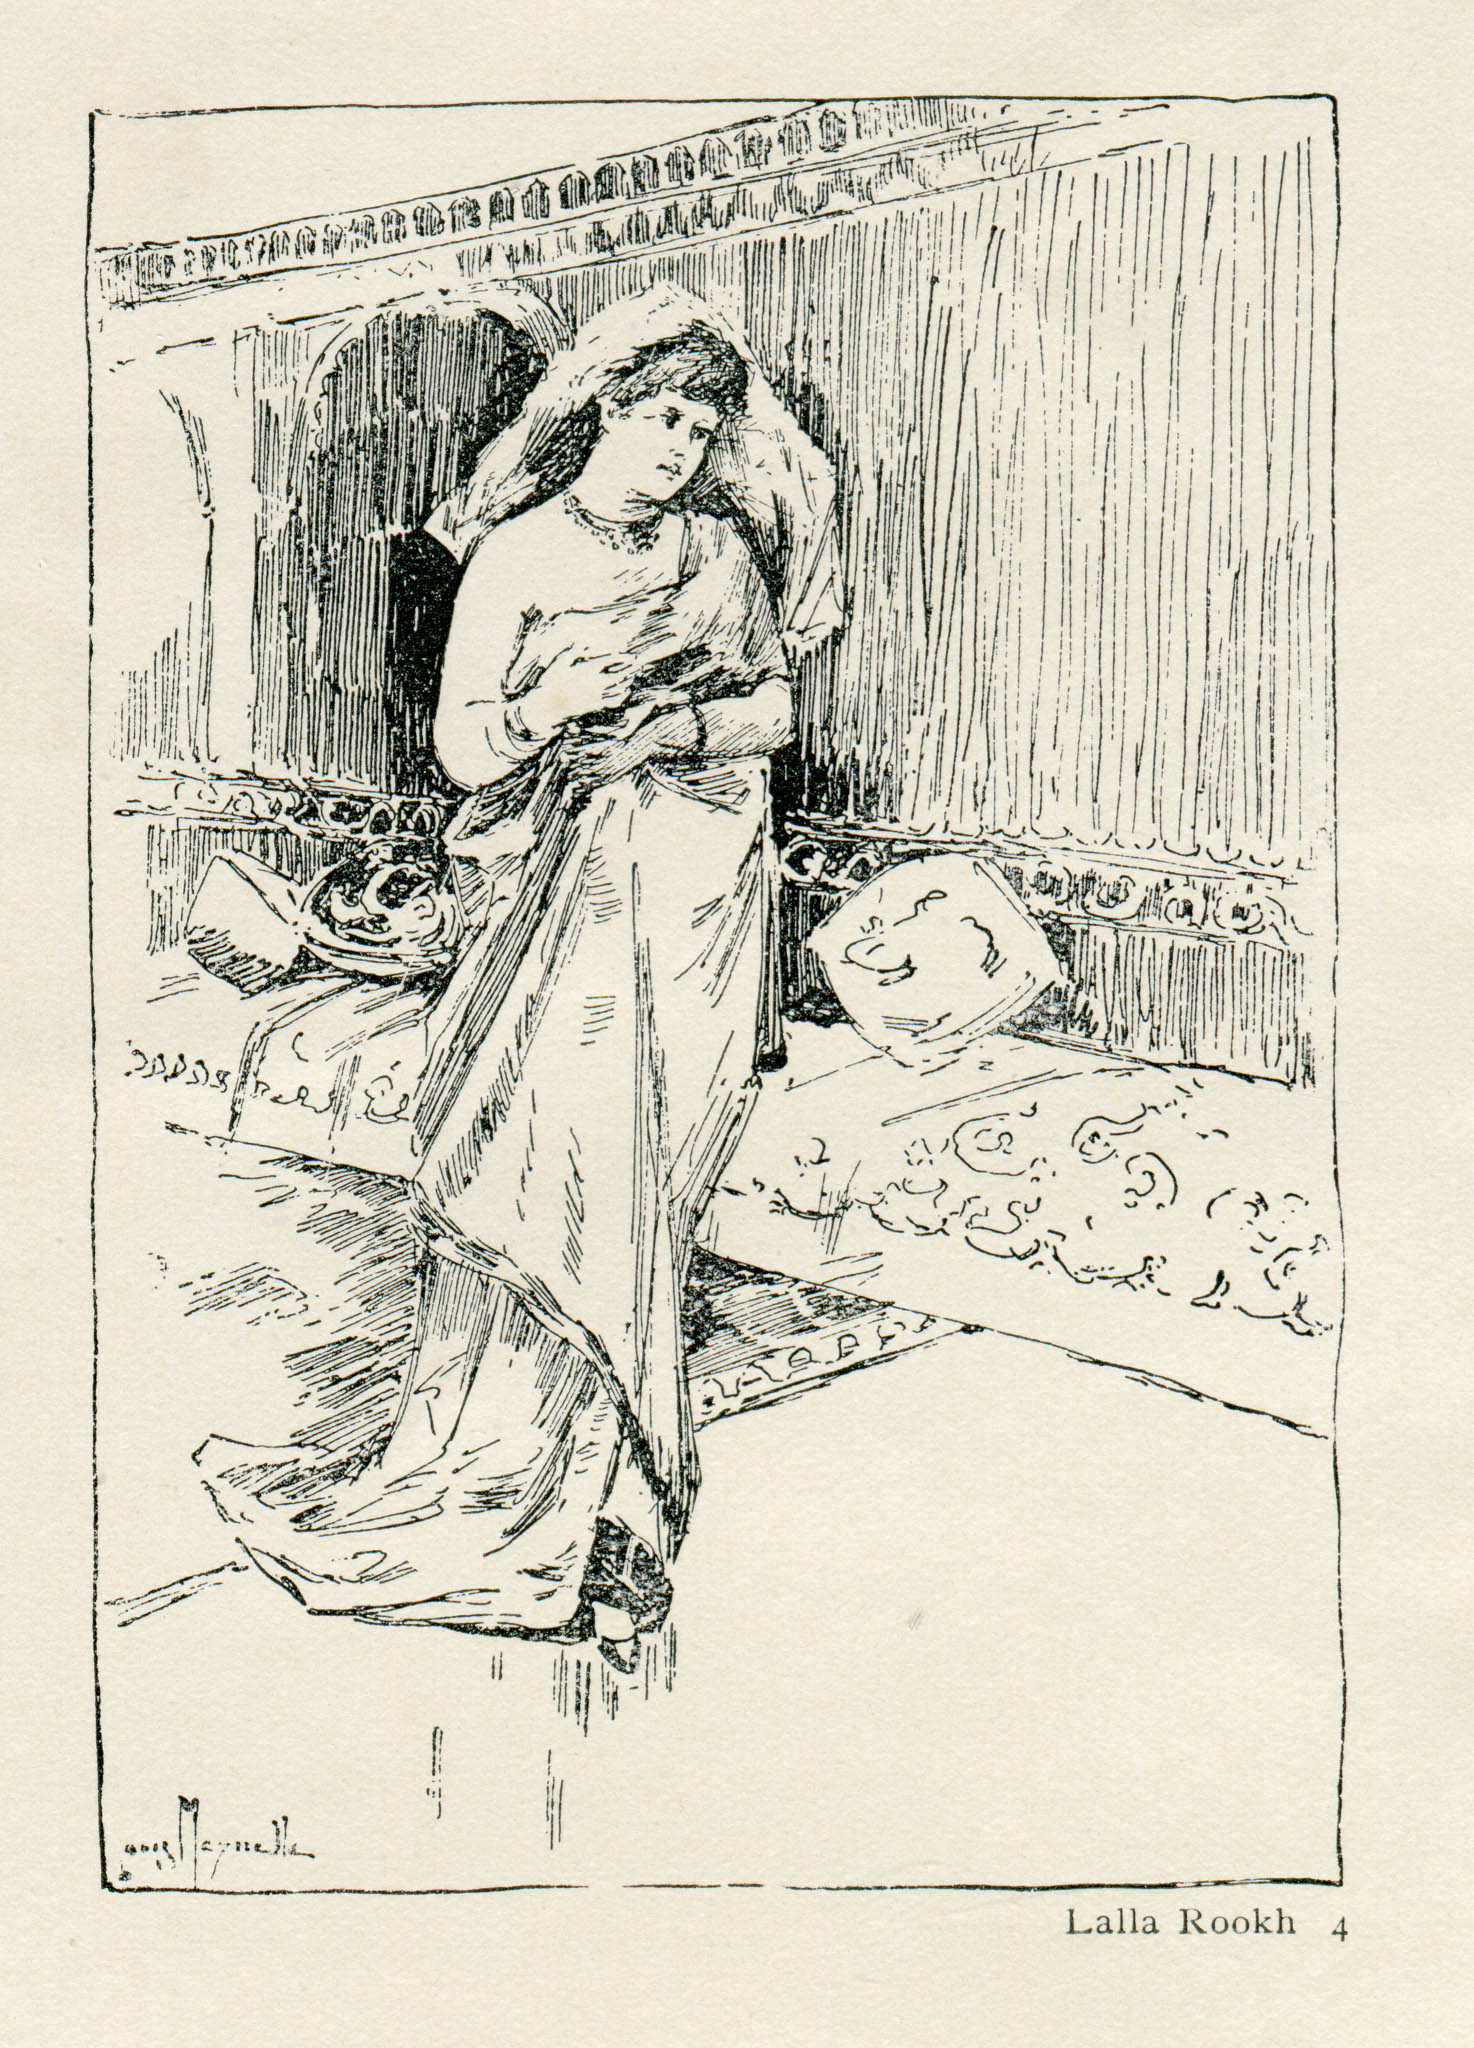 this is an illustration of a lady sleeping